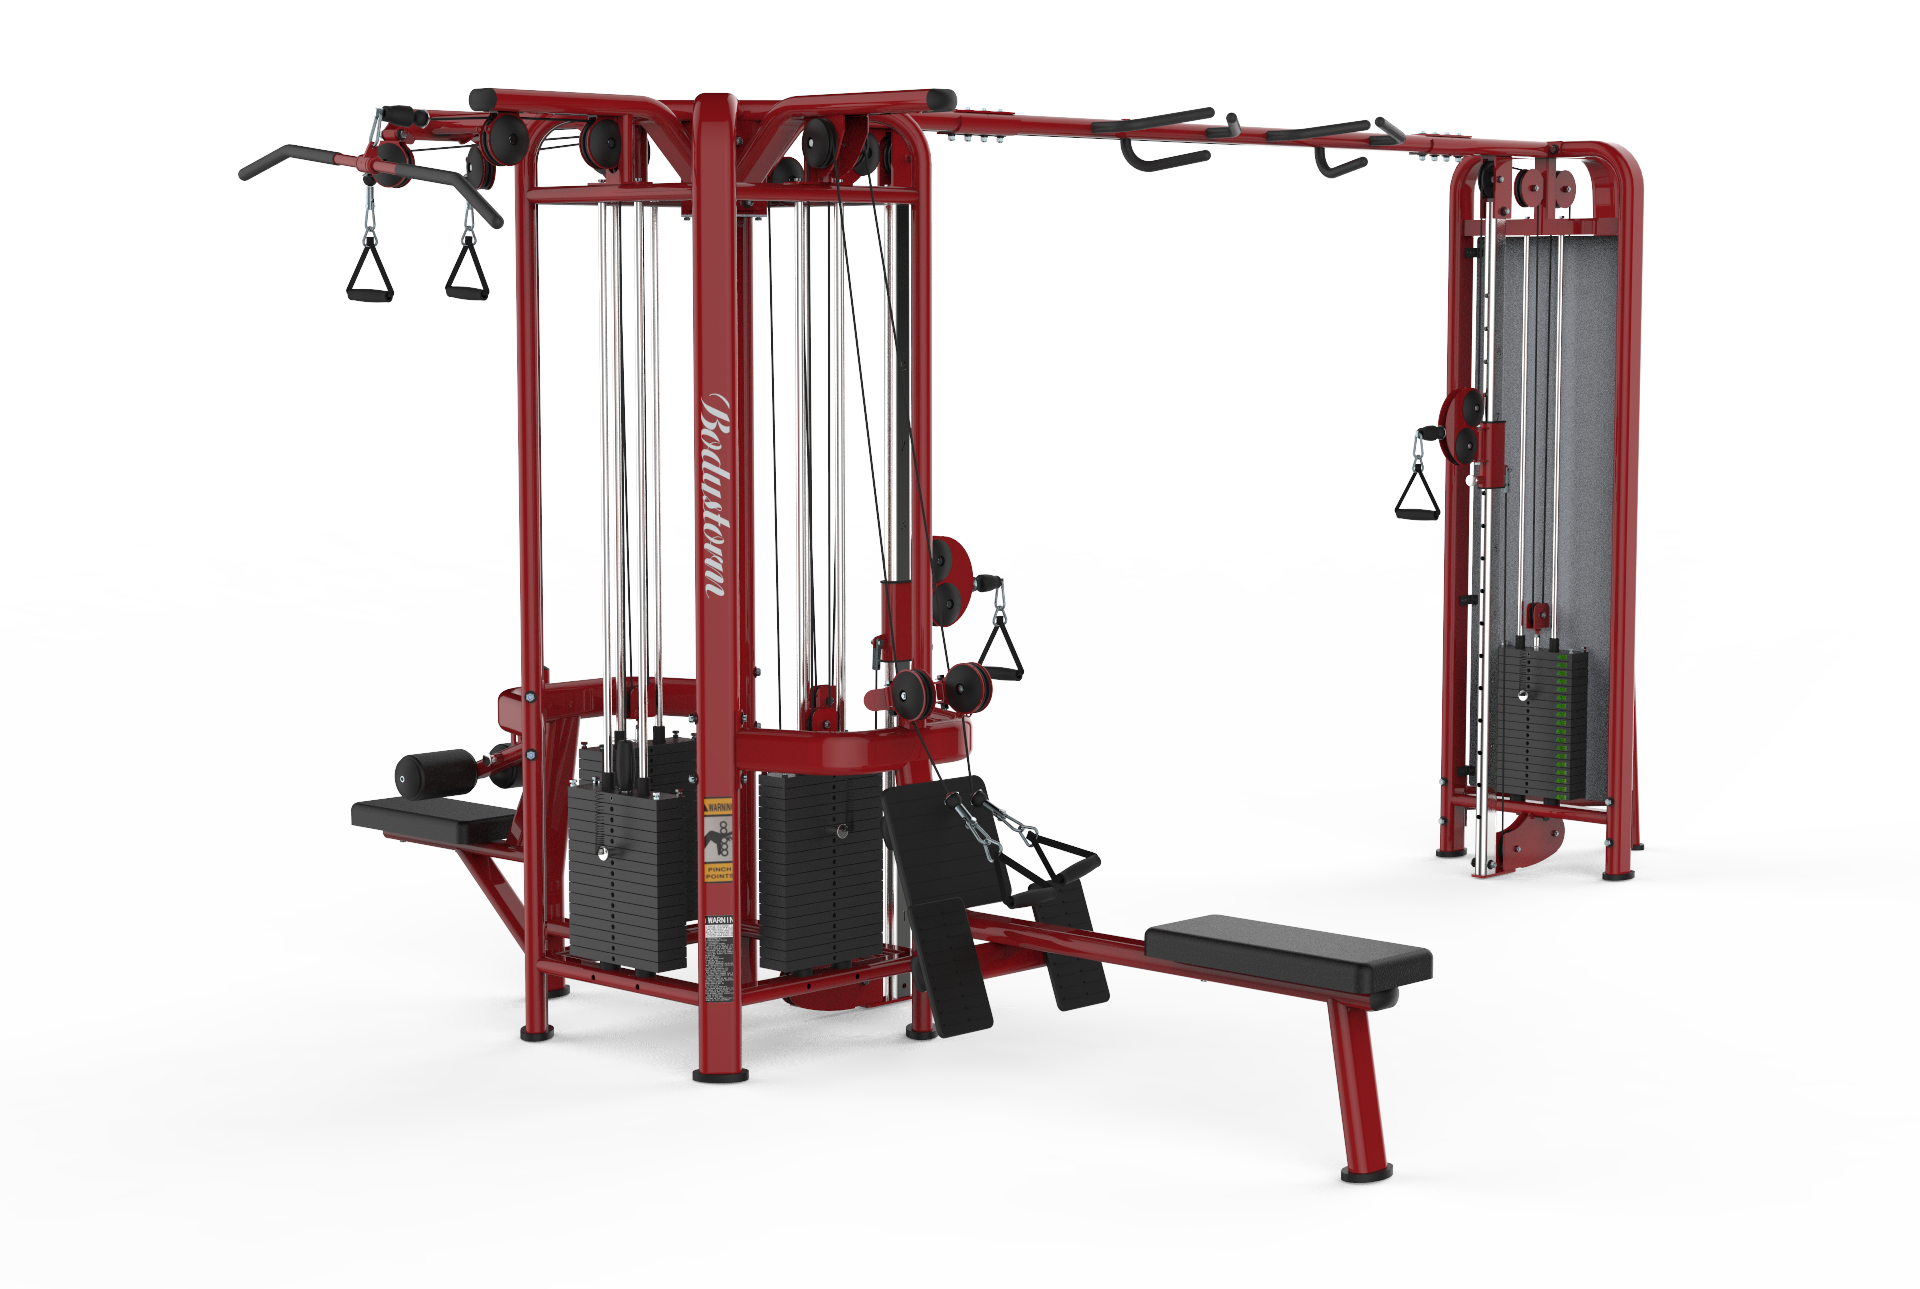 Five Station Multi - Jungle  multi Function Station workout gym fitness equipment